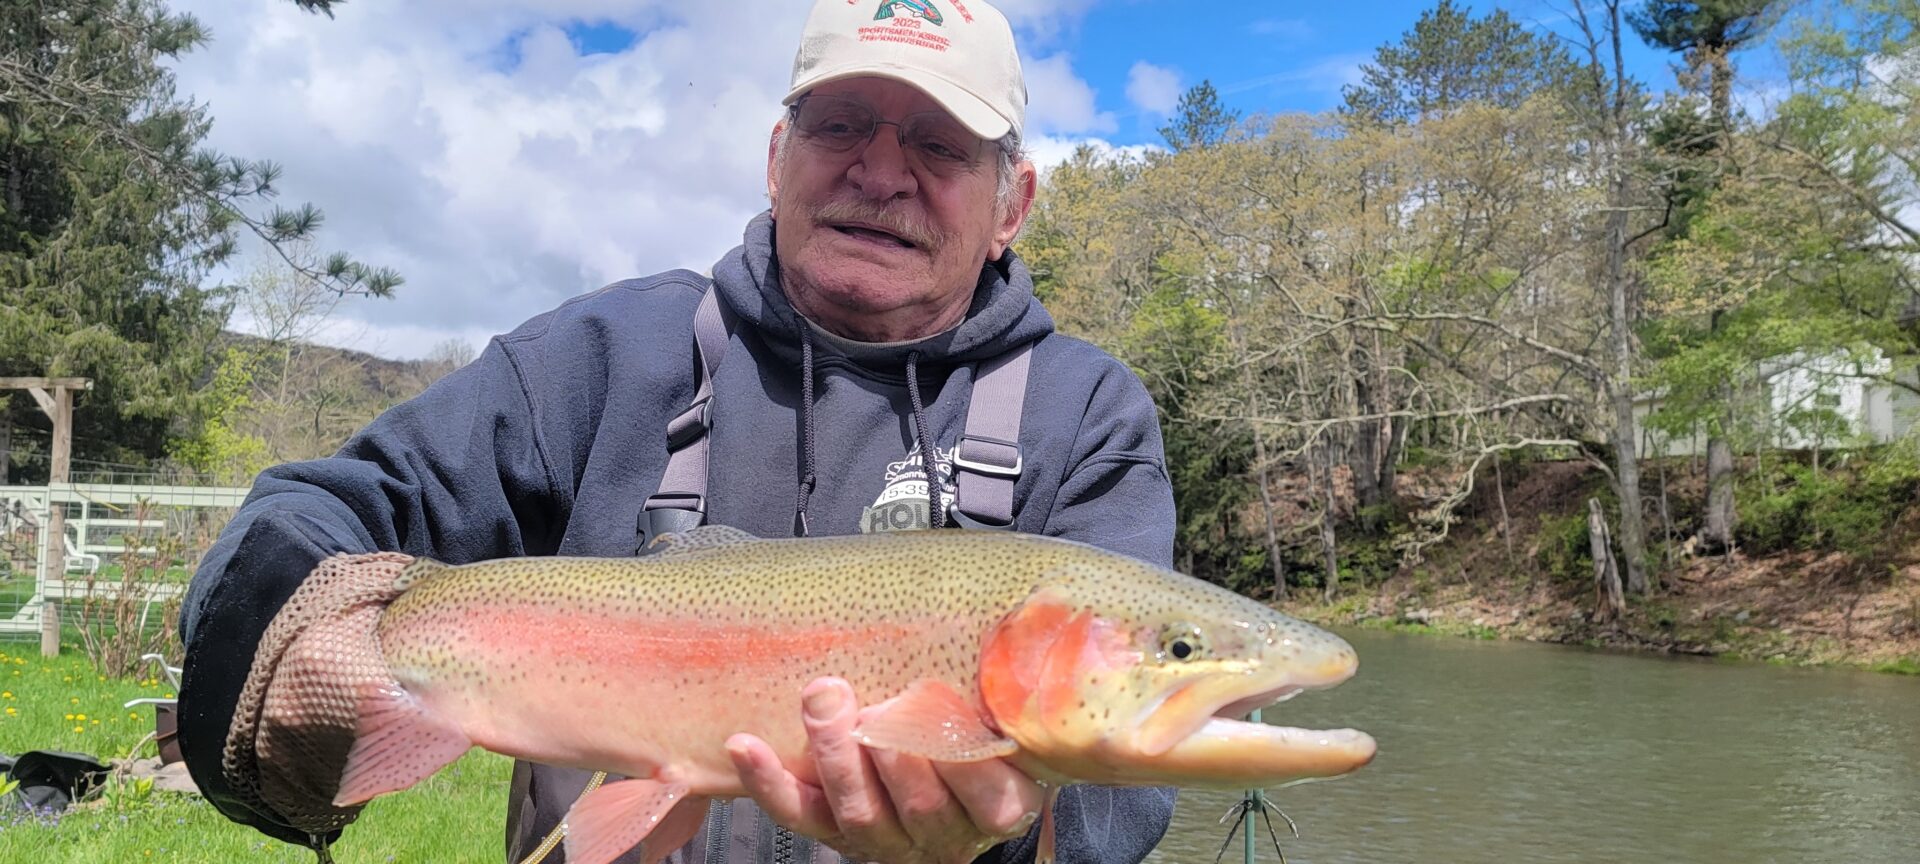 Fred Hollar with Big Rainbow Trout